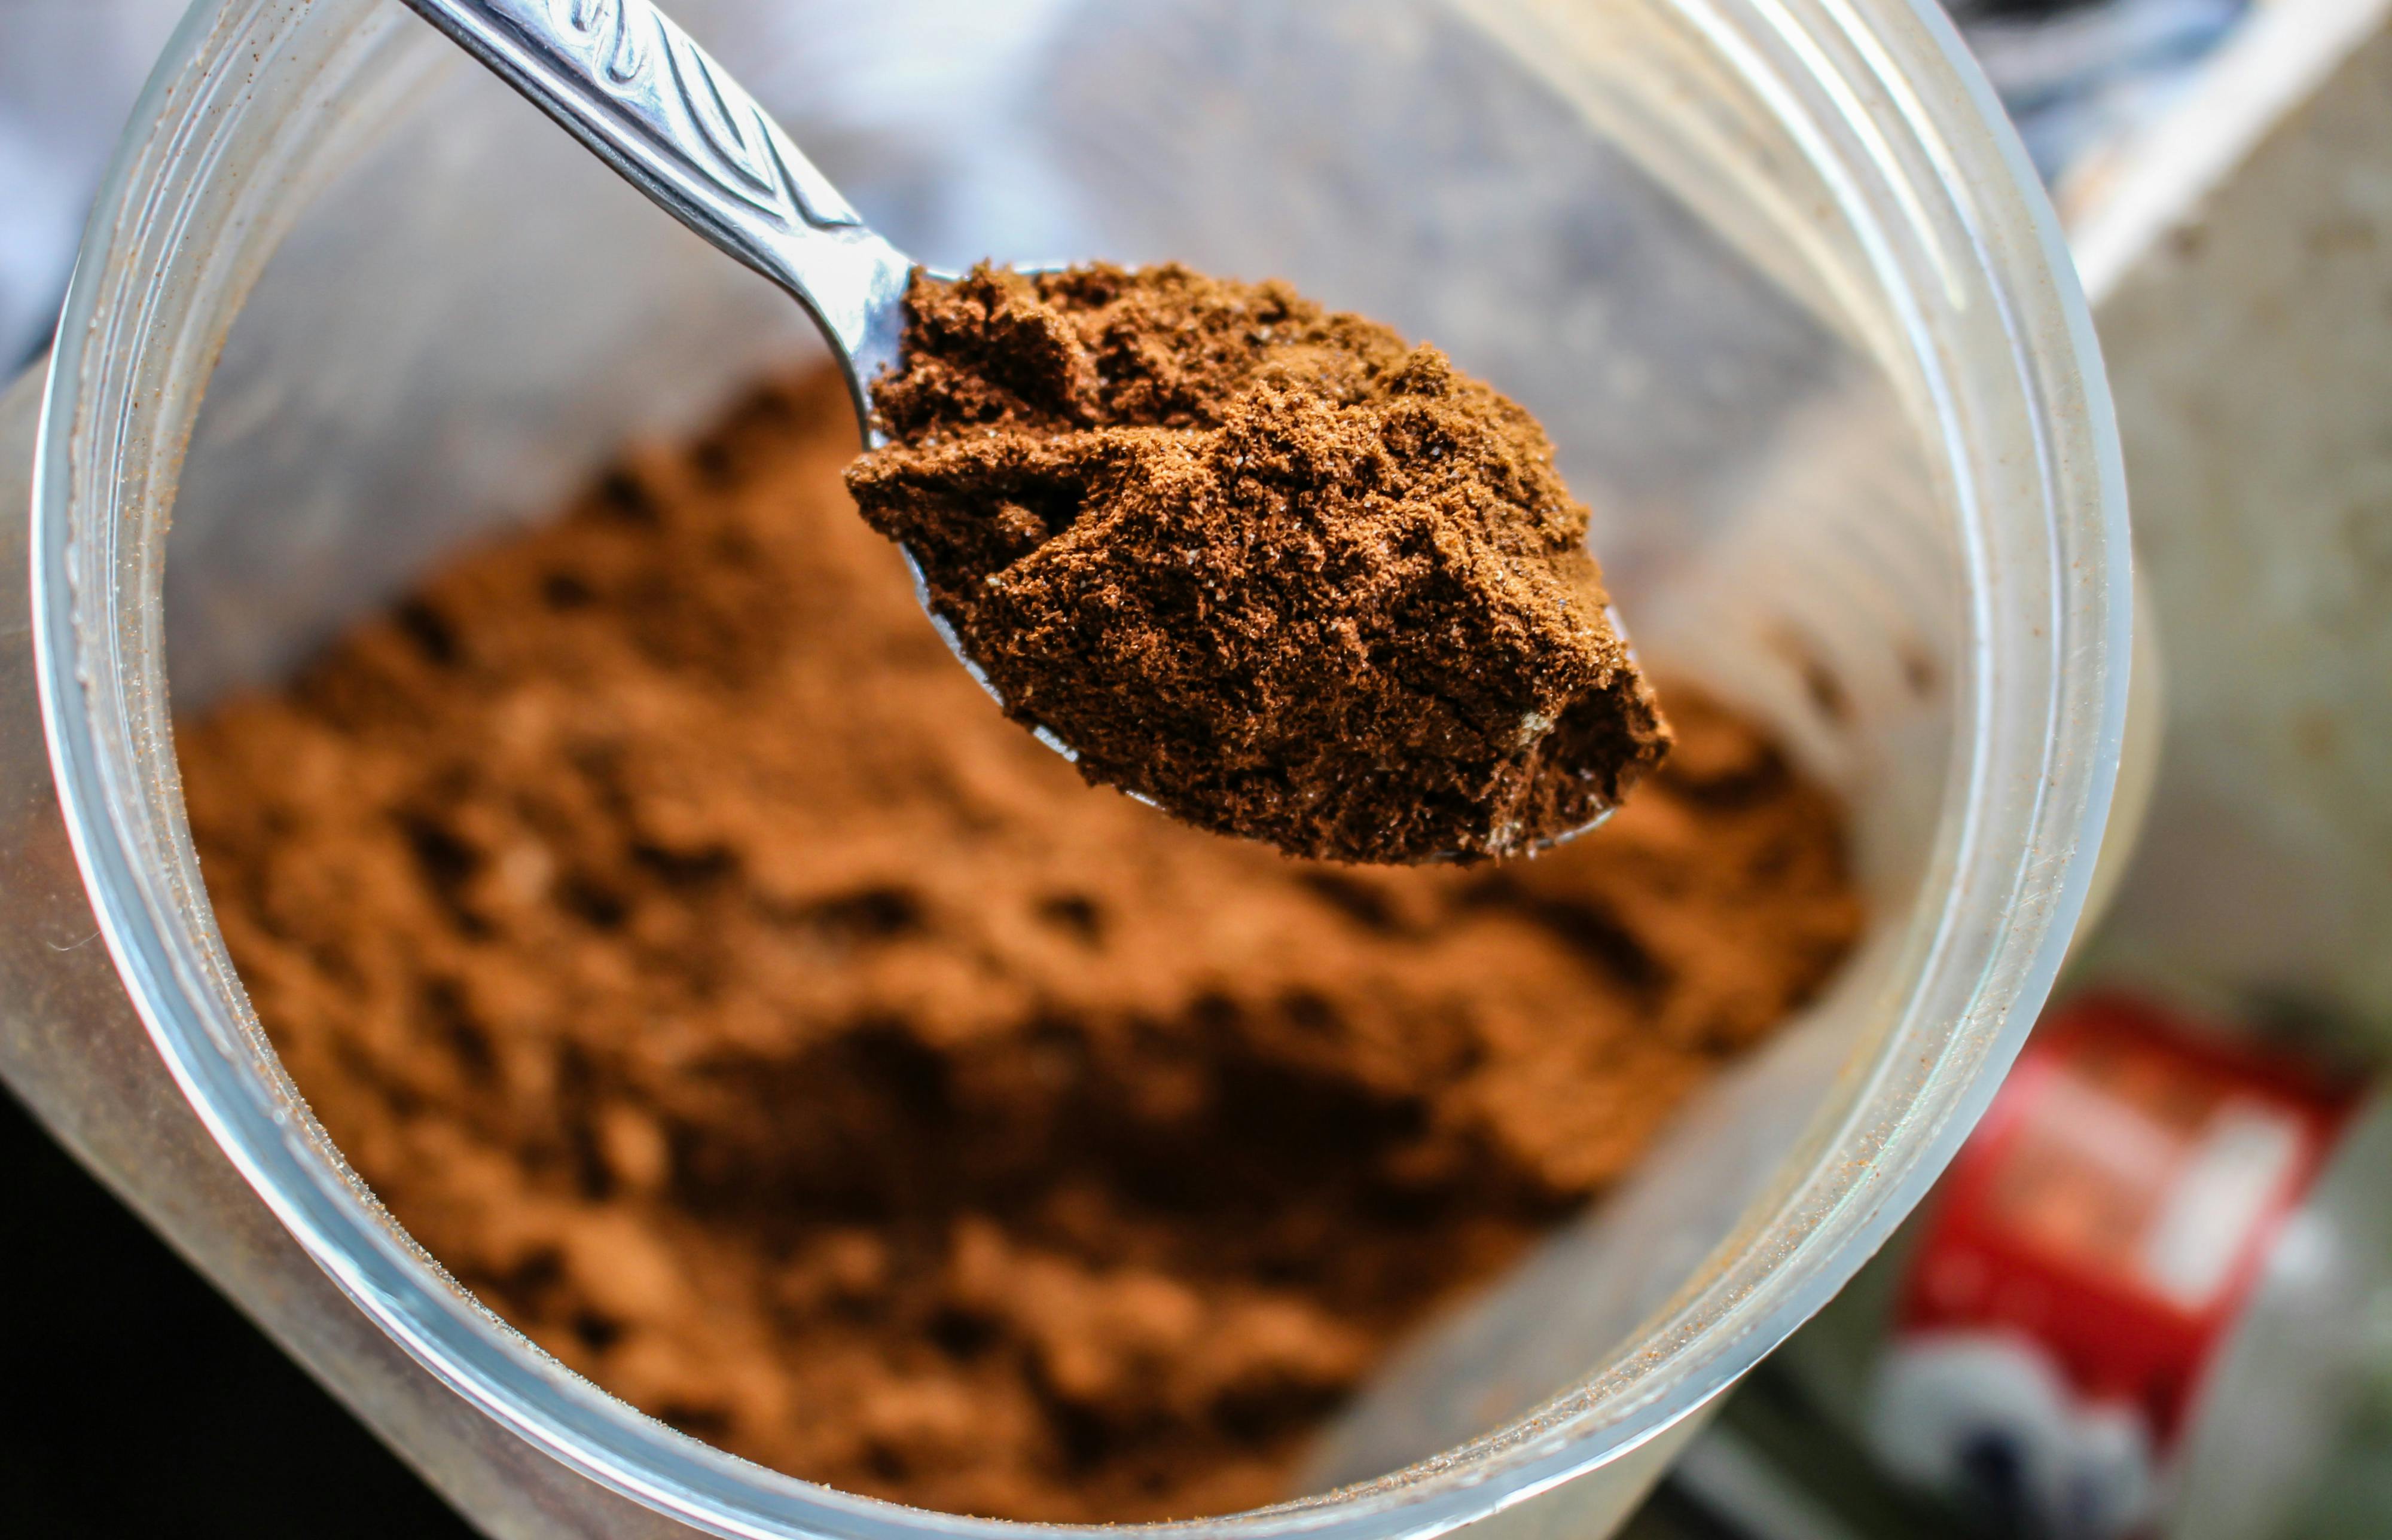 Cocoa powder on a stainless spoon. | Photo: Pexels